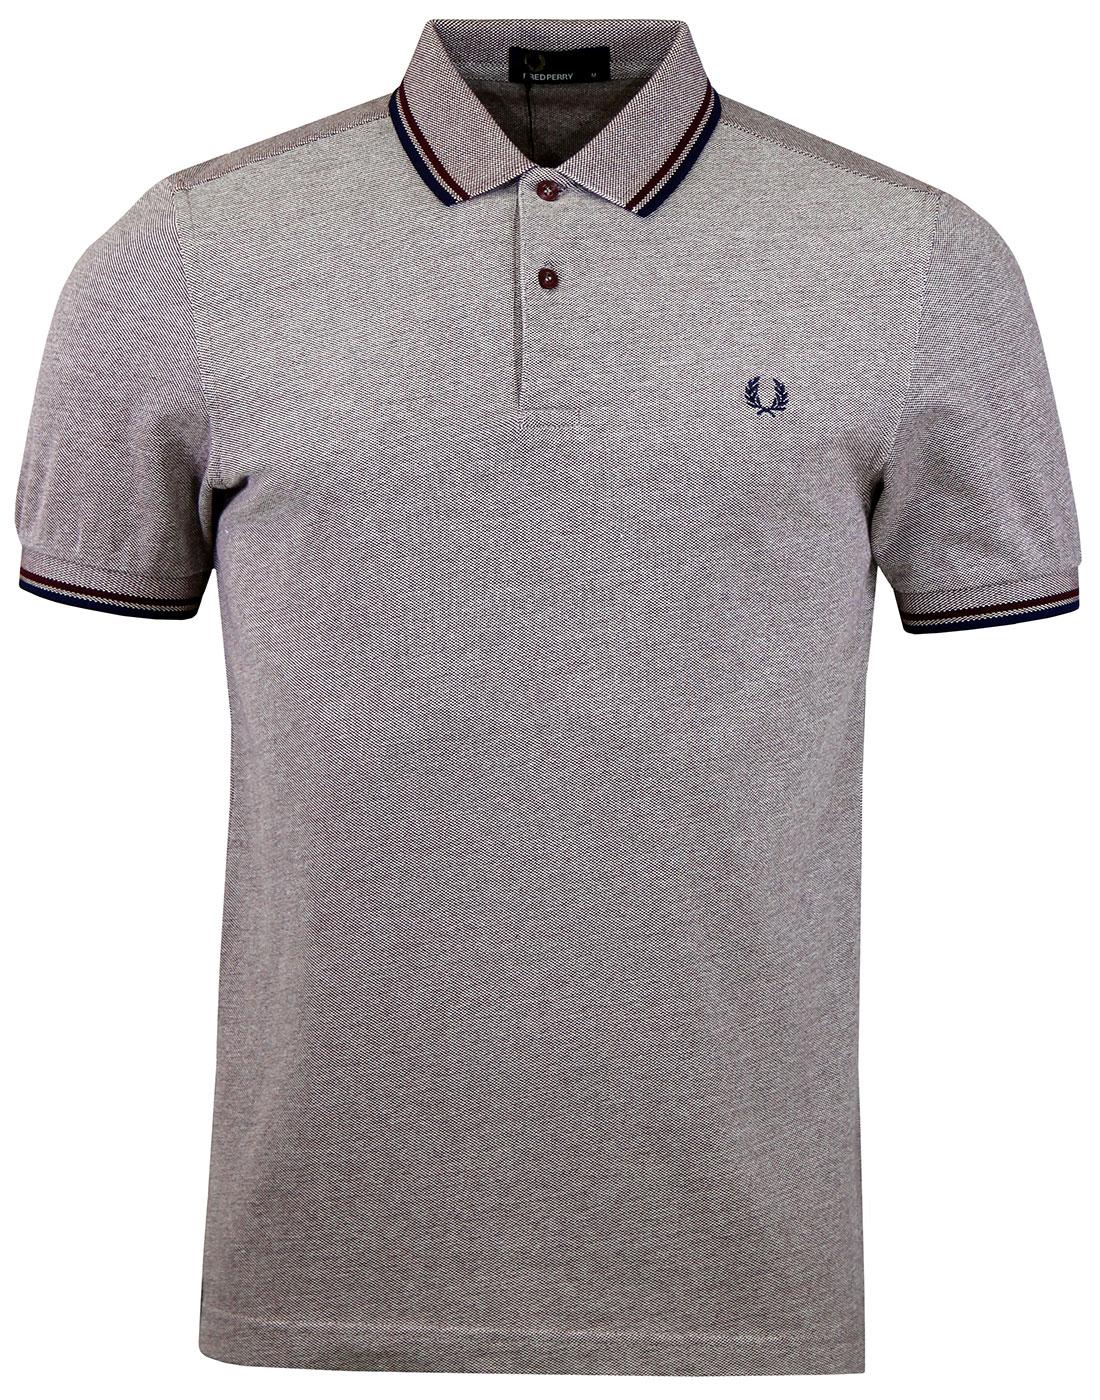 FRED PERRY M3600 Mod Twin Tipped Polo Shirt M/O